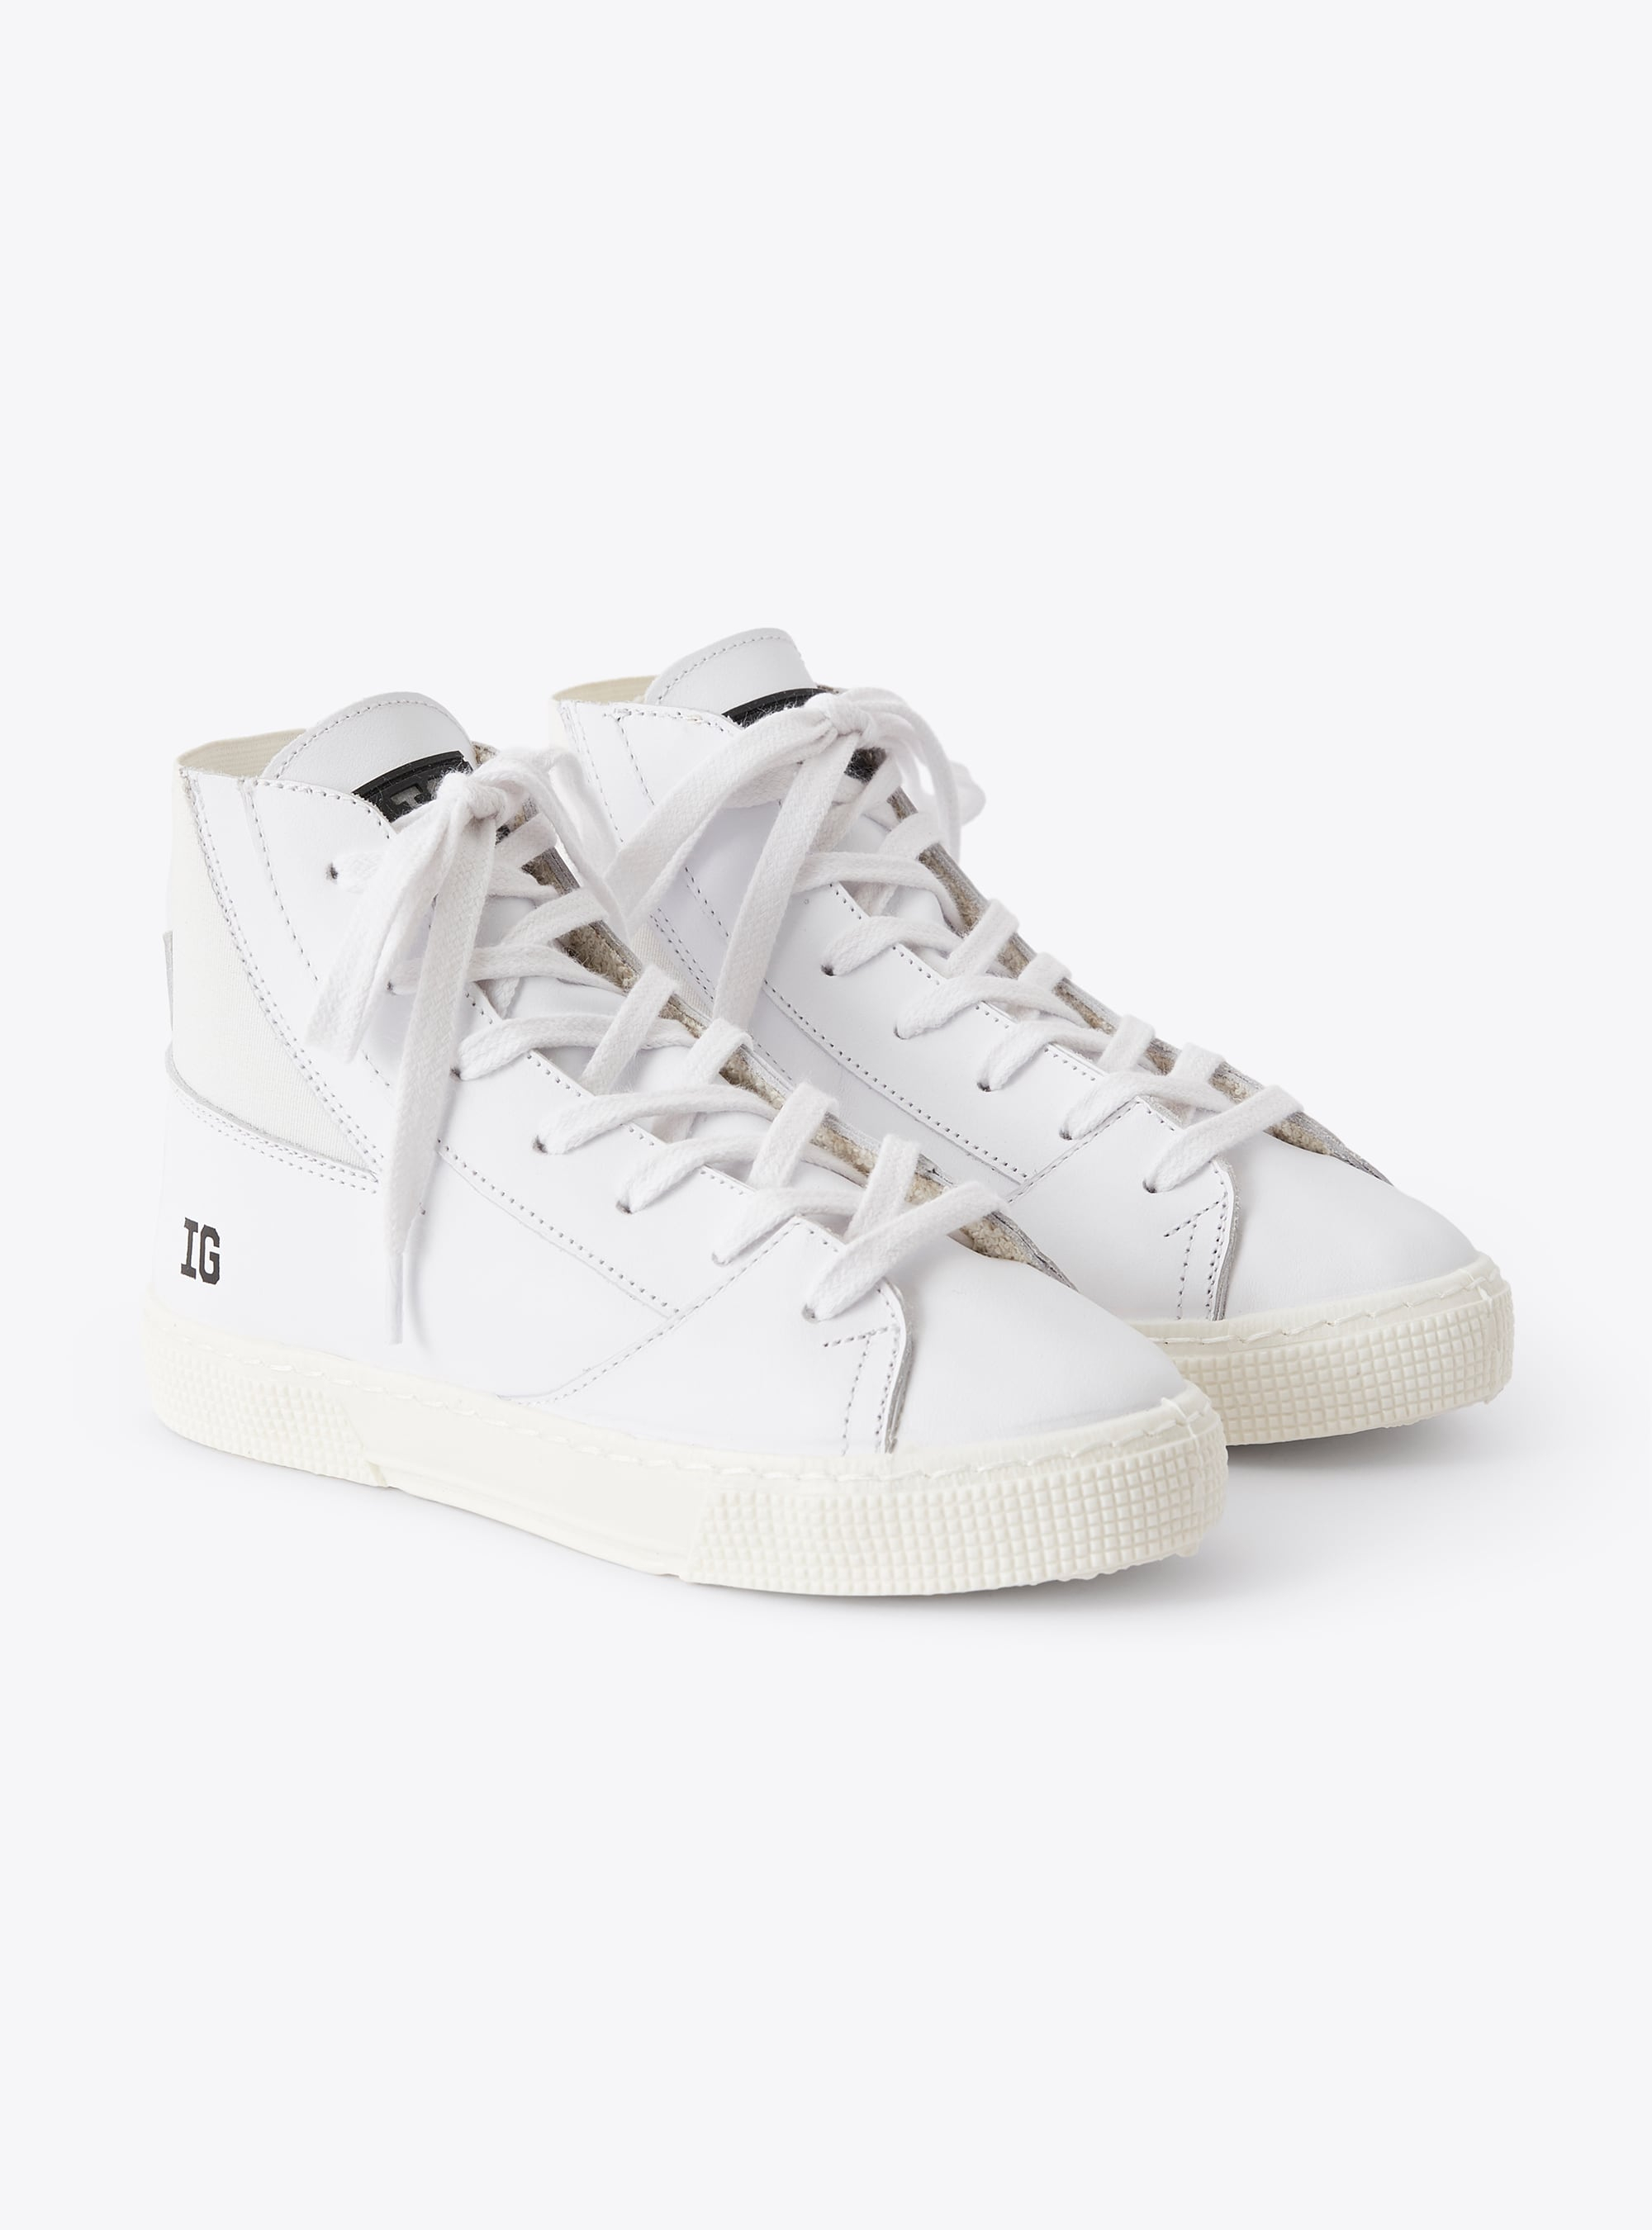 High-top IG sneaker in white leather - White | Il Gufo